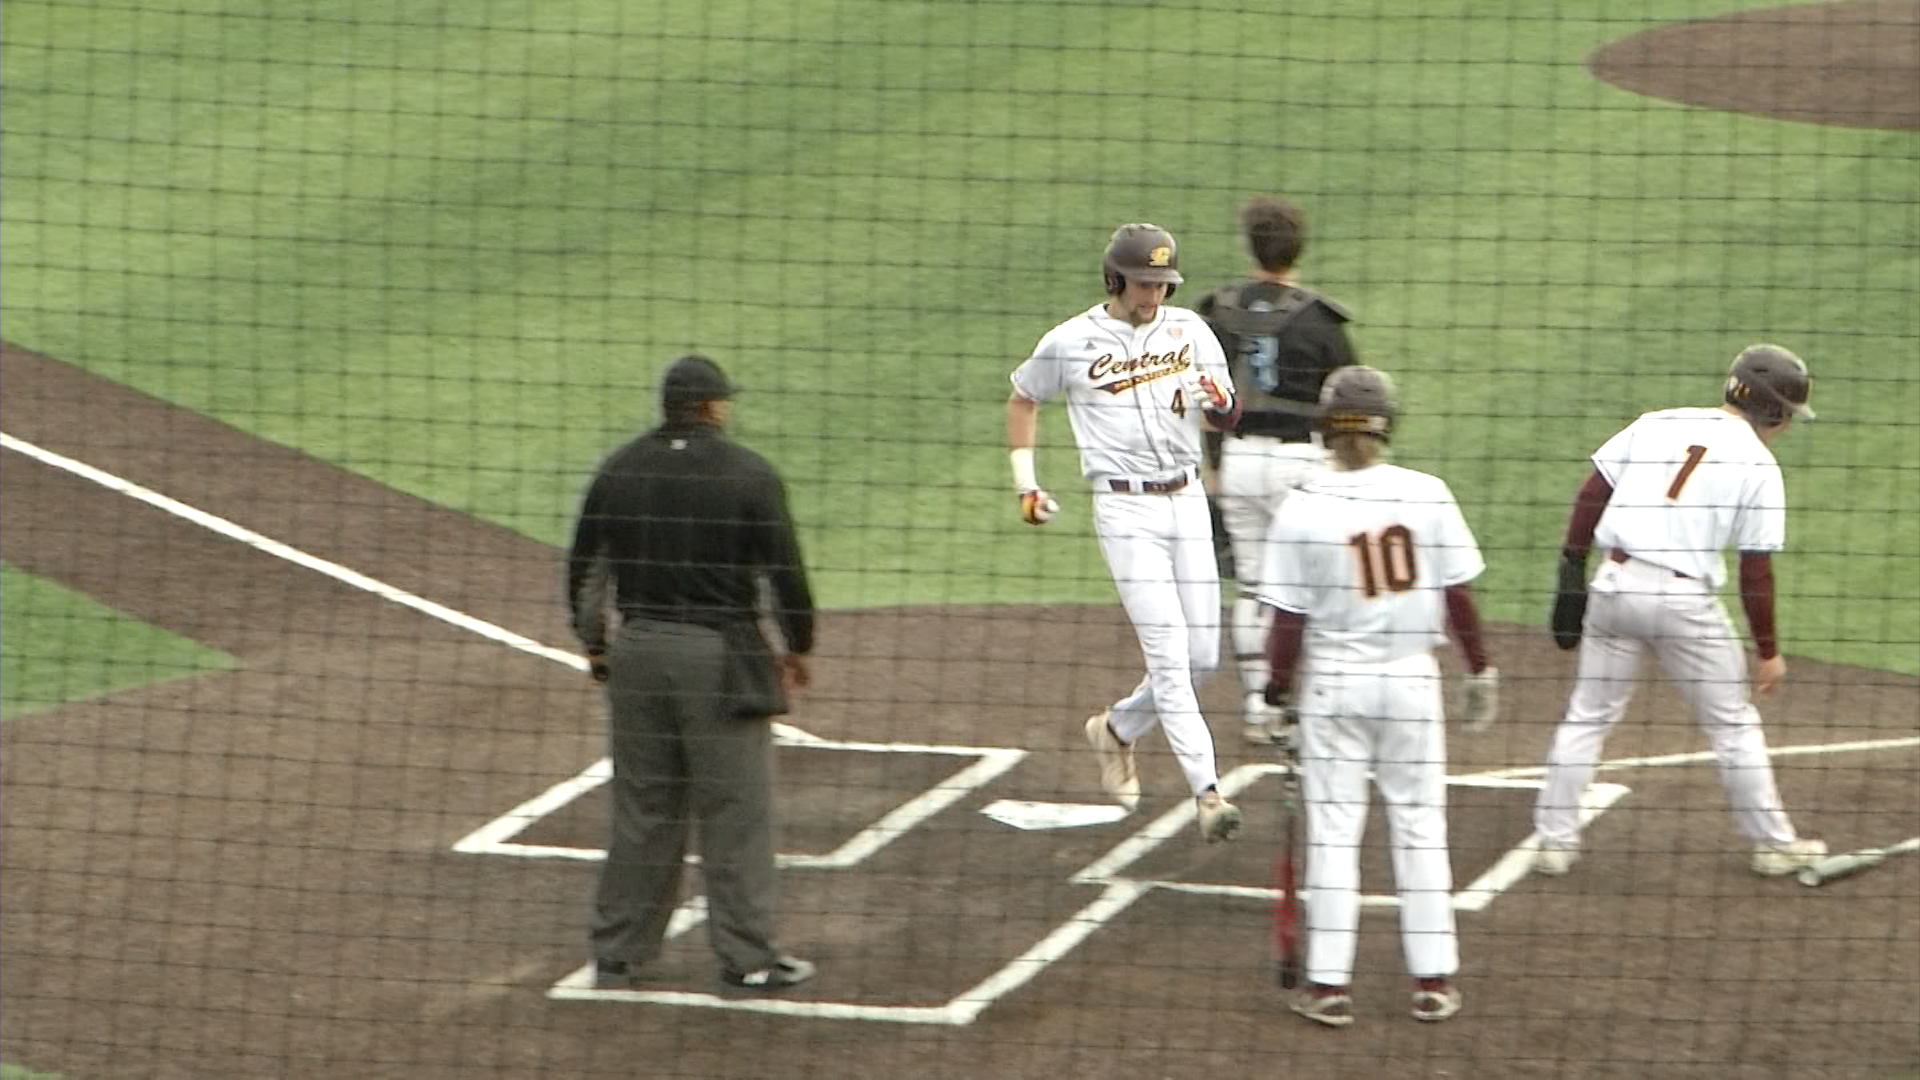 The Central Michigan Chippewas scored 19 runs in their non-conference win over Grace Christian.